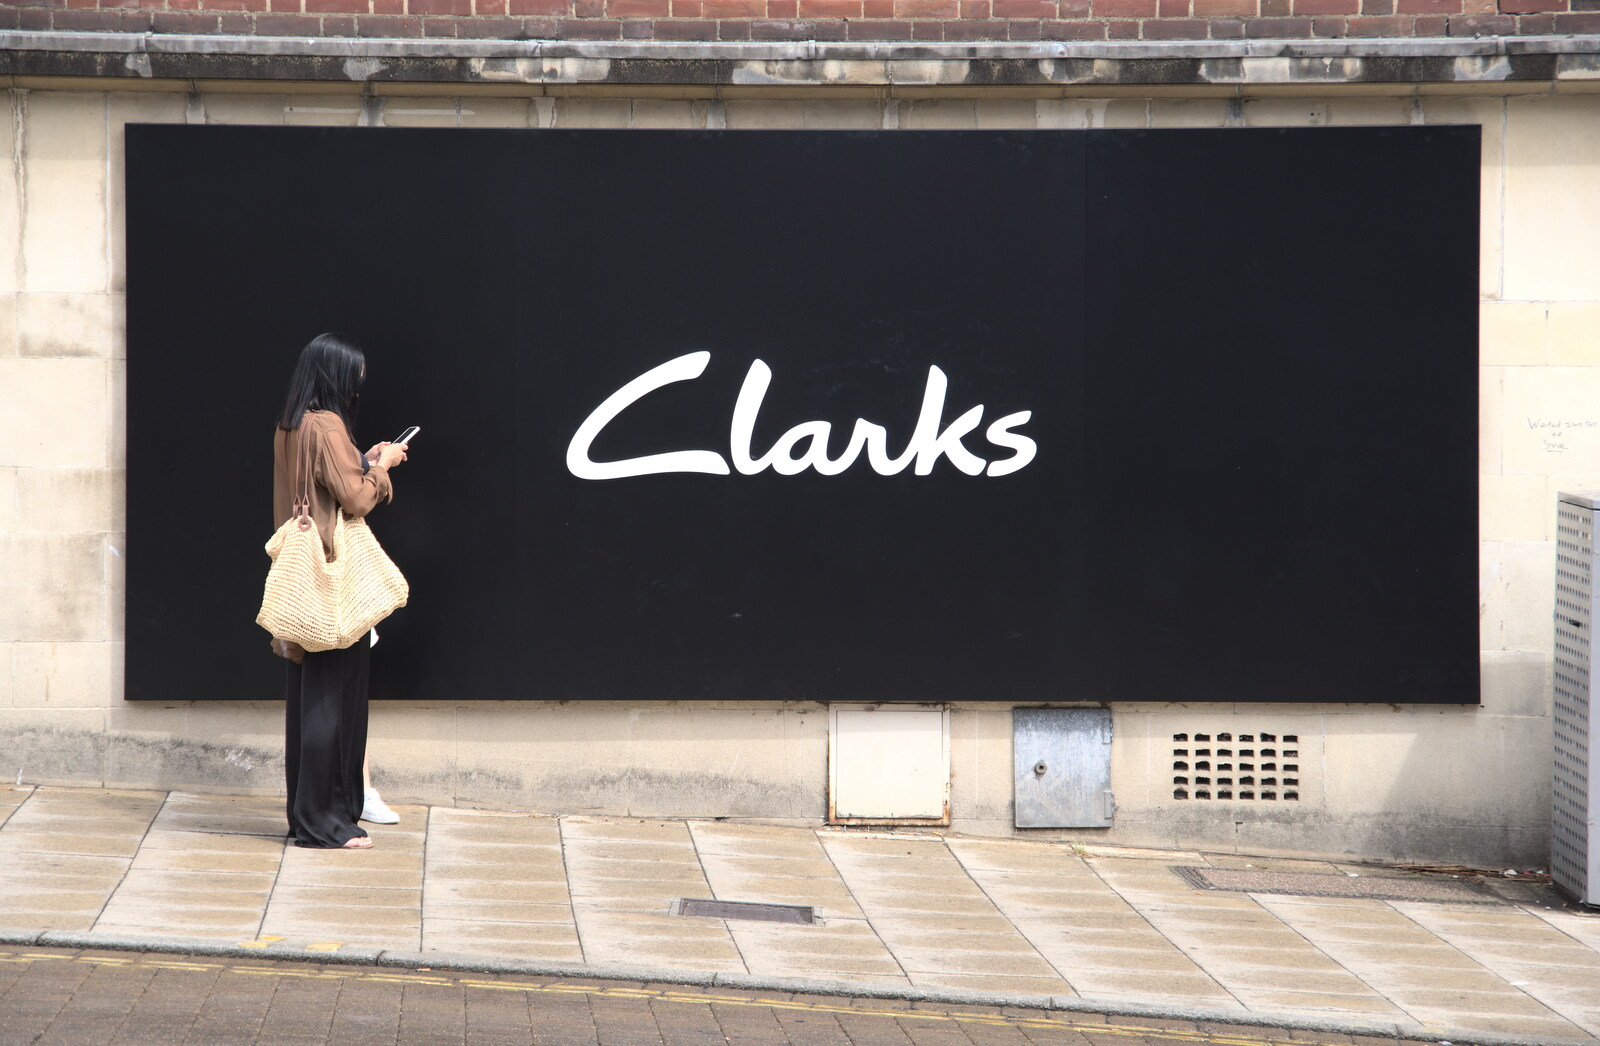 The World Cube Association Rubik's Competition, St. Andrew's Hall, Norwich - 31st July 2022: The big but simple Clarks hoarding is quite striking